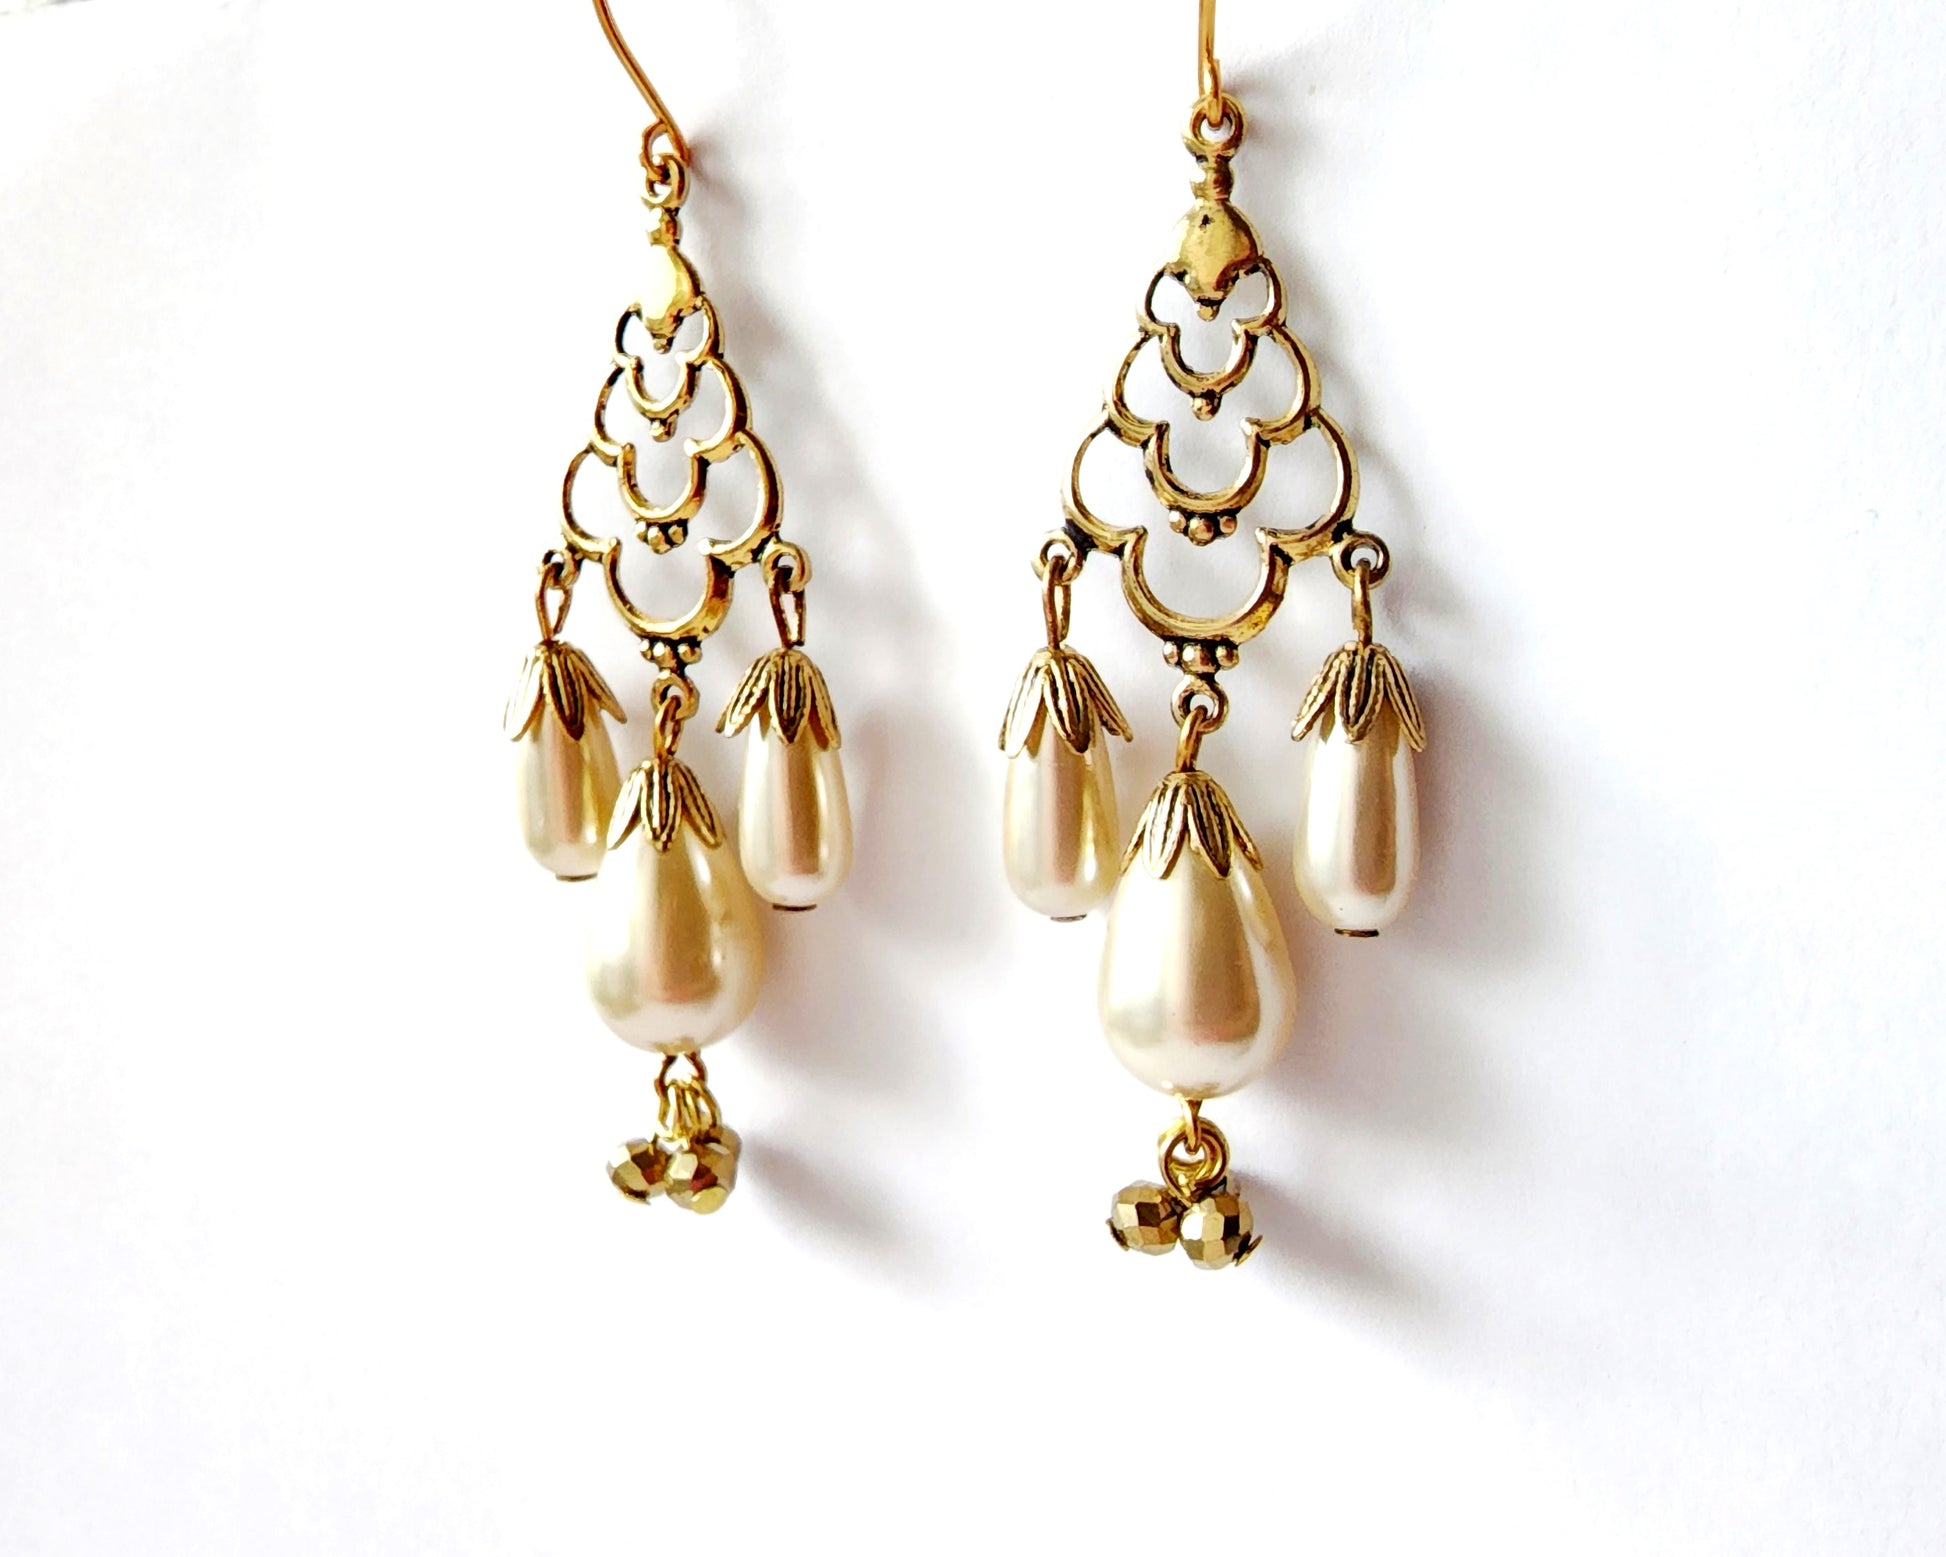 Long Vintage Pearl Drop Gold Crystal Earrings, Long Pearl Chandelier earrings with drop shaped pearls and gold crystal